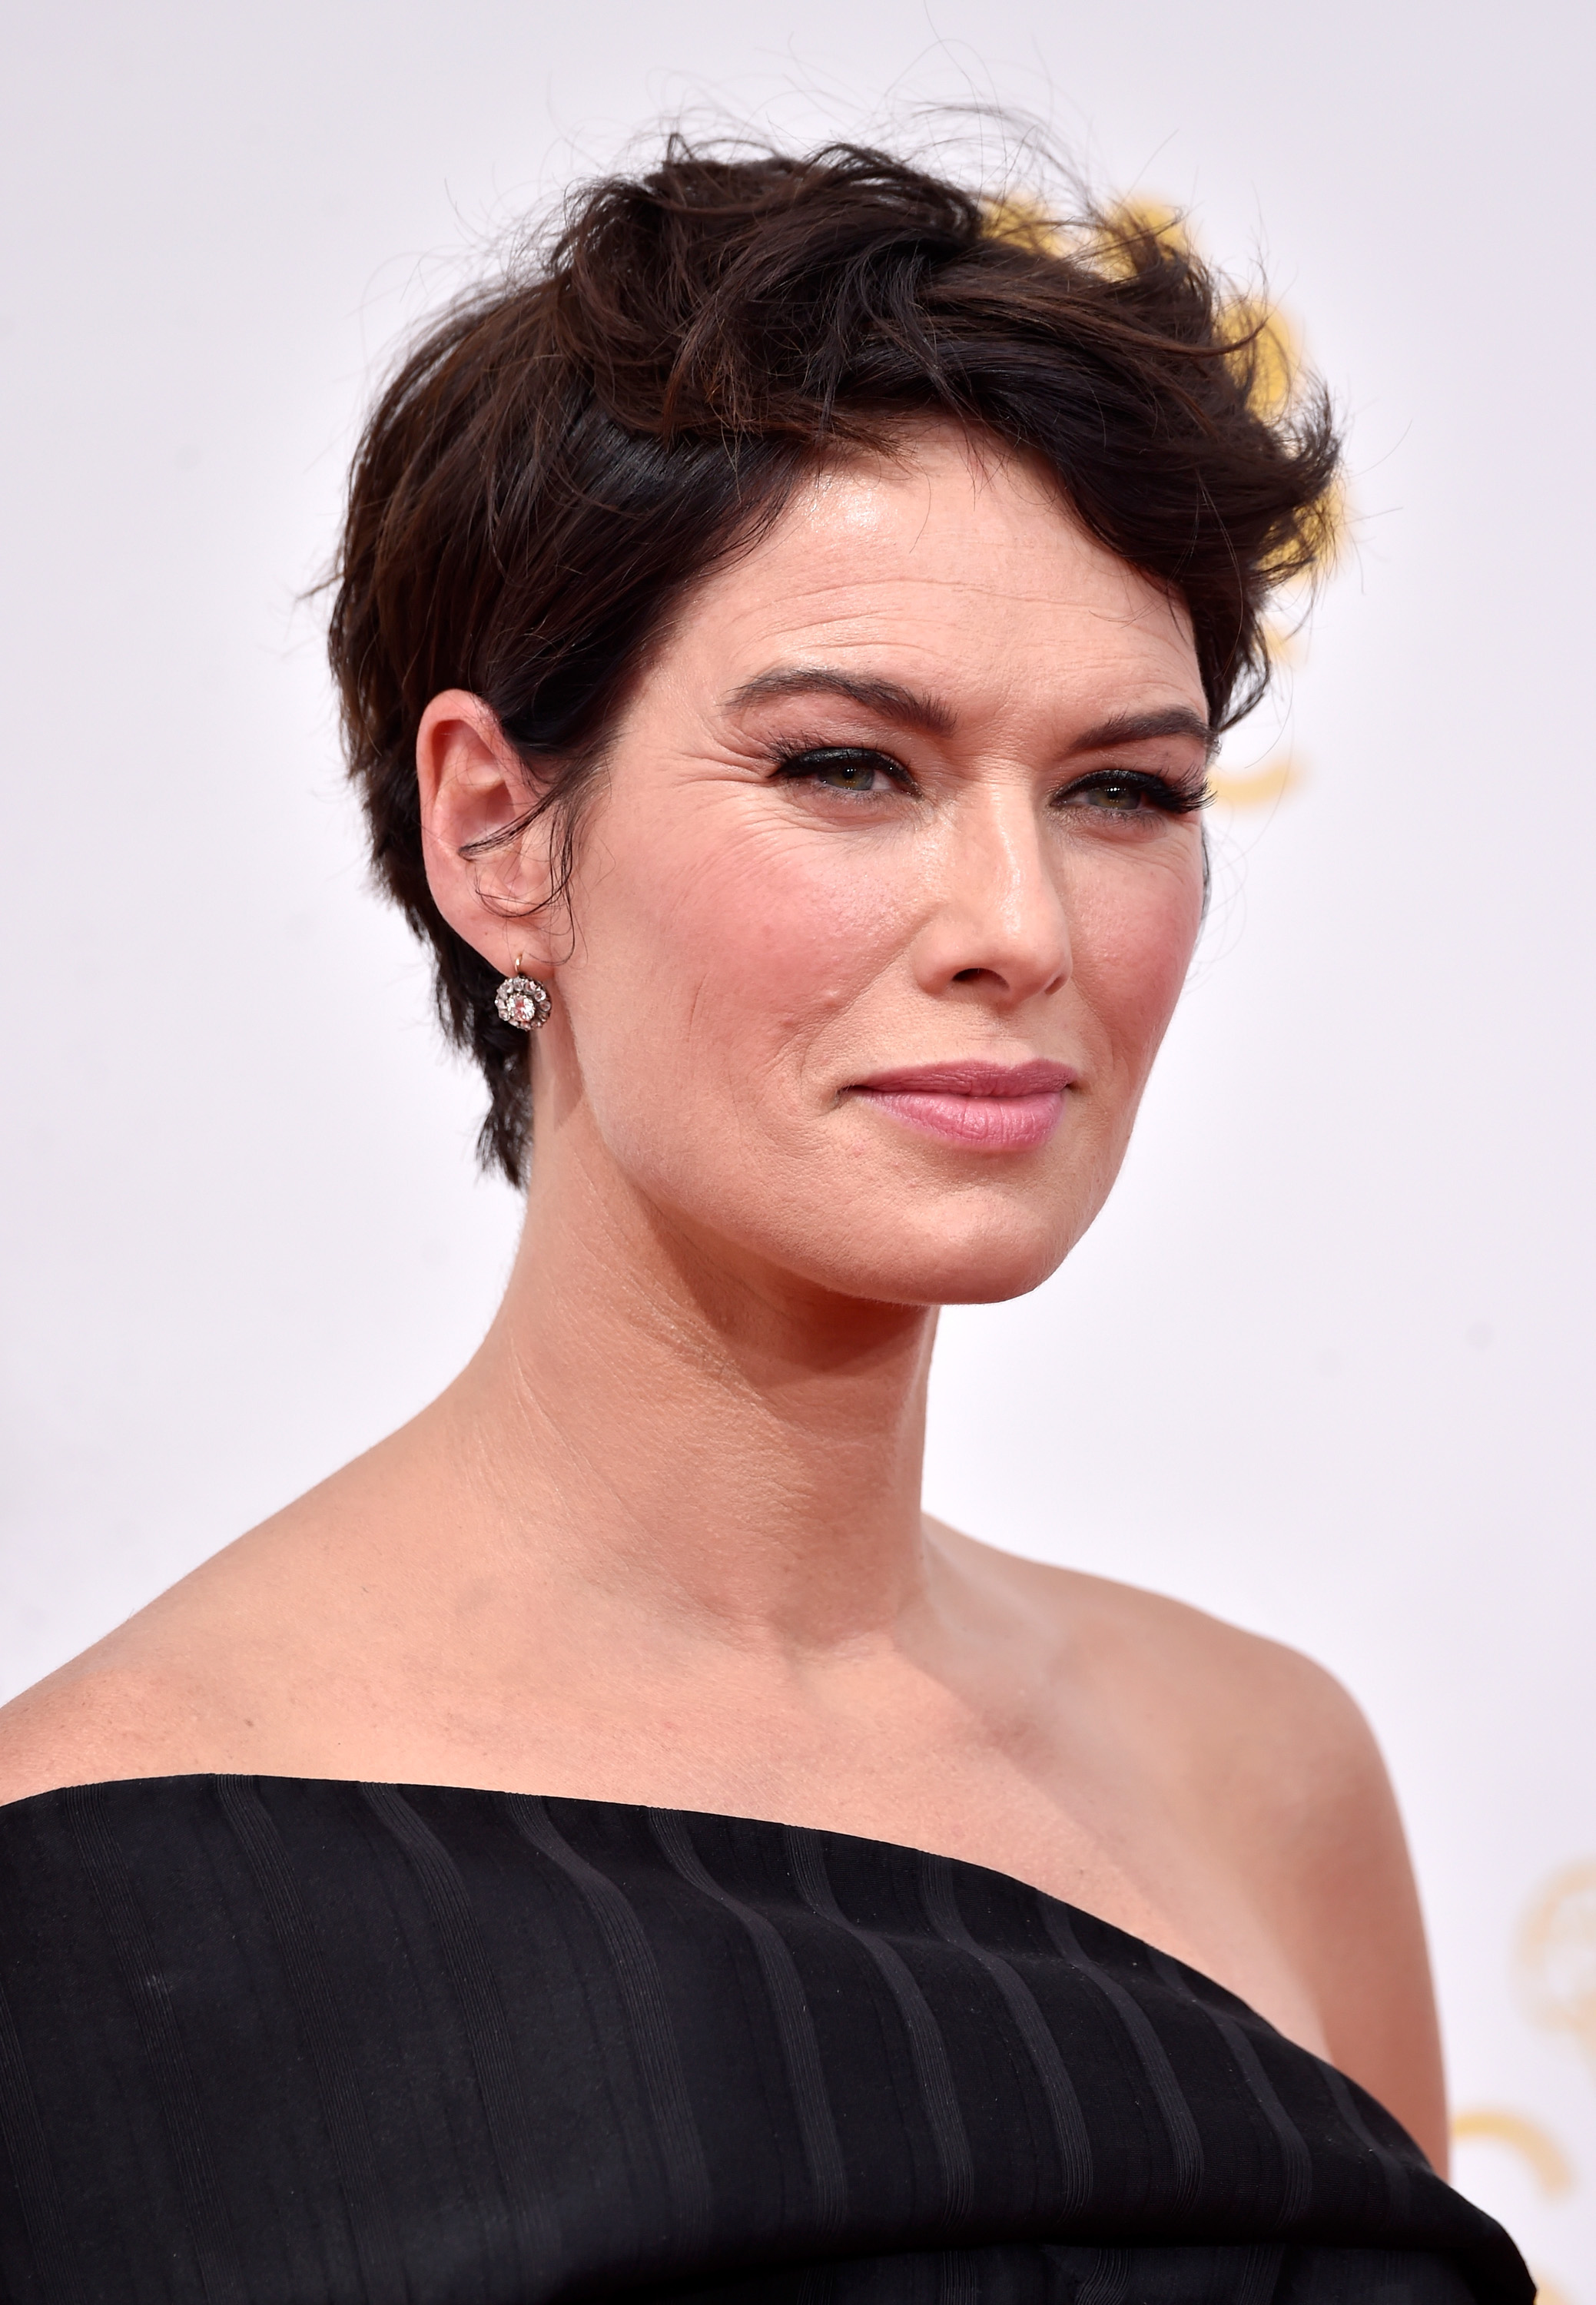 Lena Headey S Naked Game Of Thrones Season 5 Scene Gets The Greenlight Because There S No